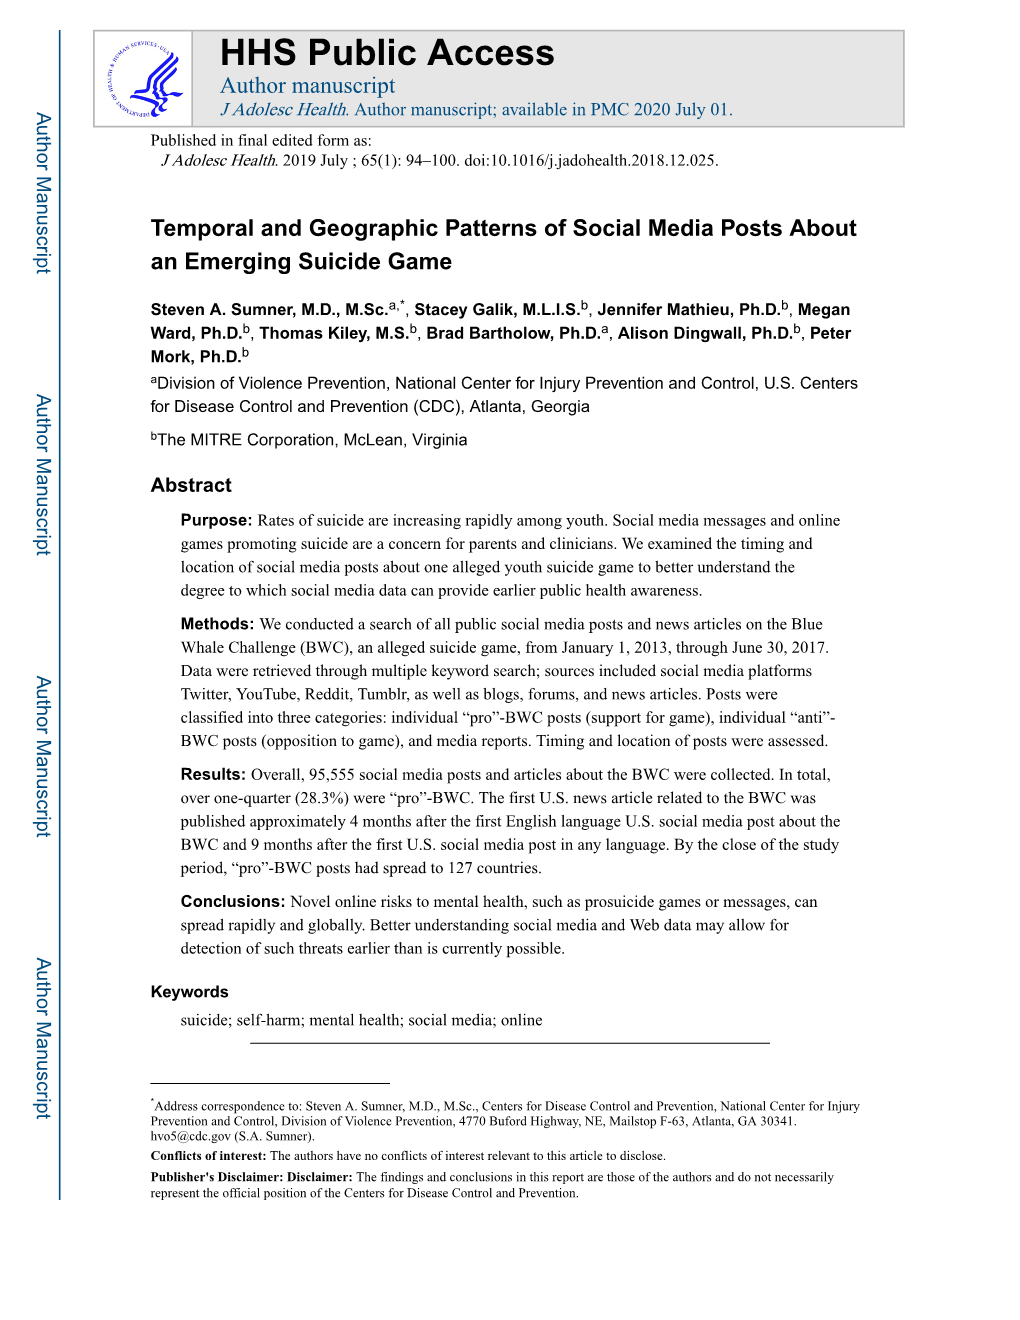 Temporal and Geographic Patterns of Social Media Posts About an Emerging Suicide Game